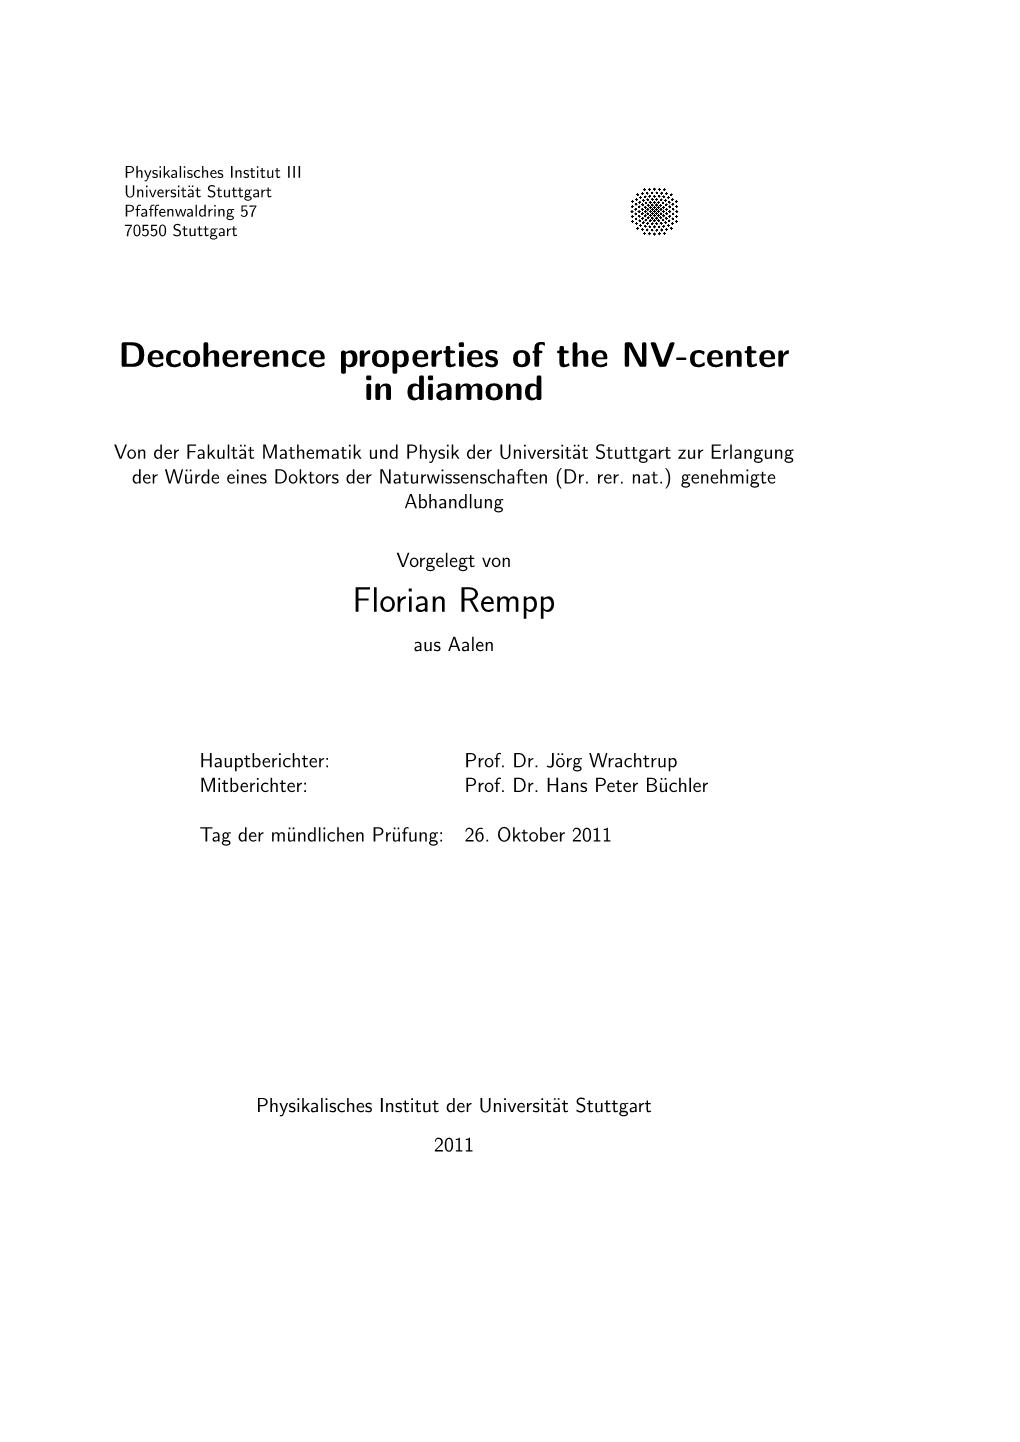 Decoherence Properties of the NV-Center in Diamond